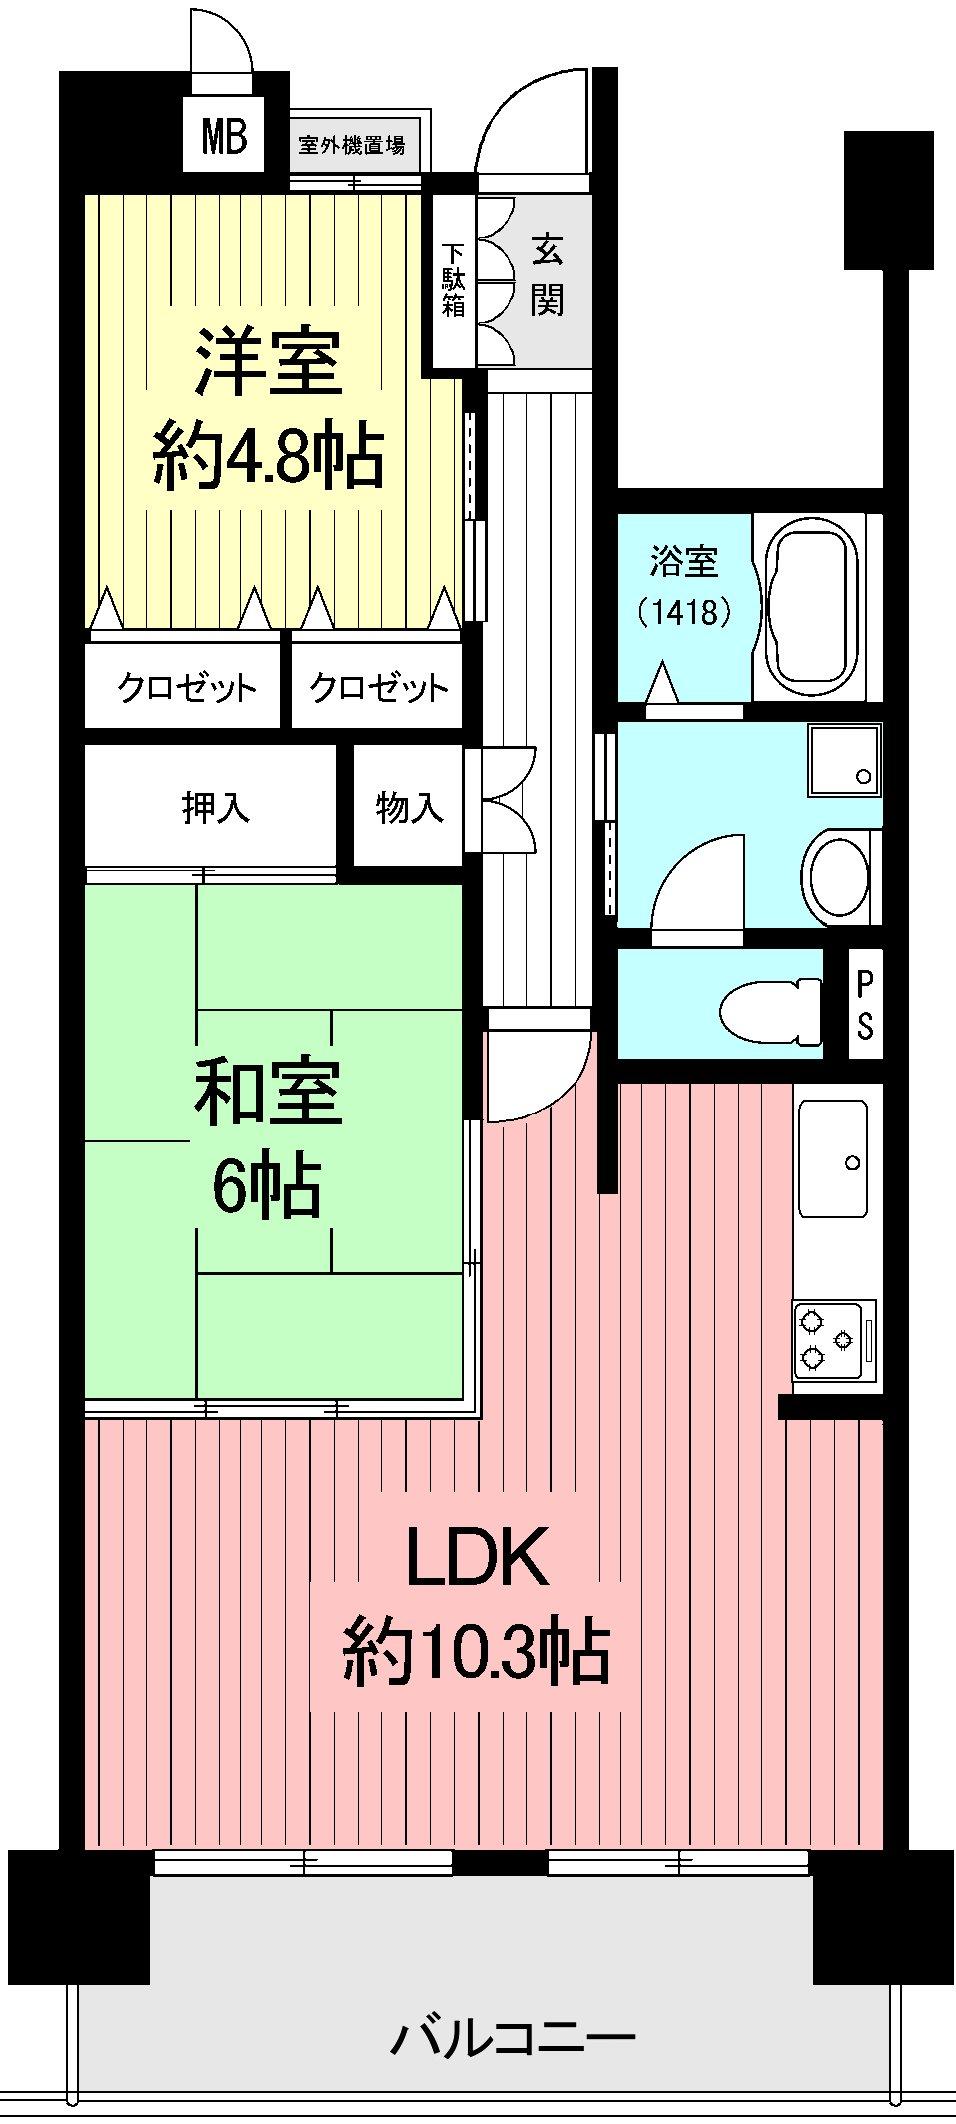 Floor plan. 2LDK, Price 24.4 million yen, Occupied area 59.04 sq m , Balcony area 9.69 sq m LDK ・ Western-style flooring The kitchen is bright and easy-to-use 2LDK